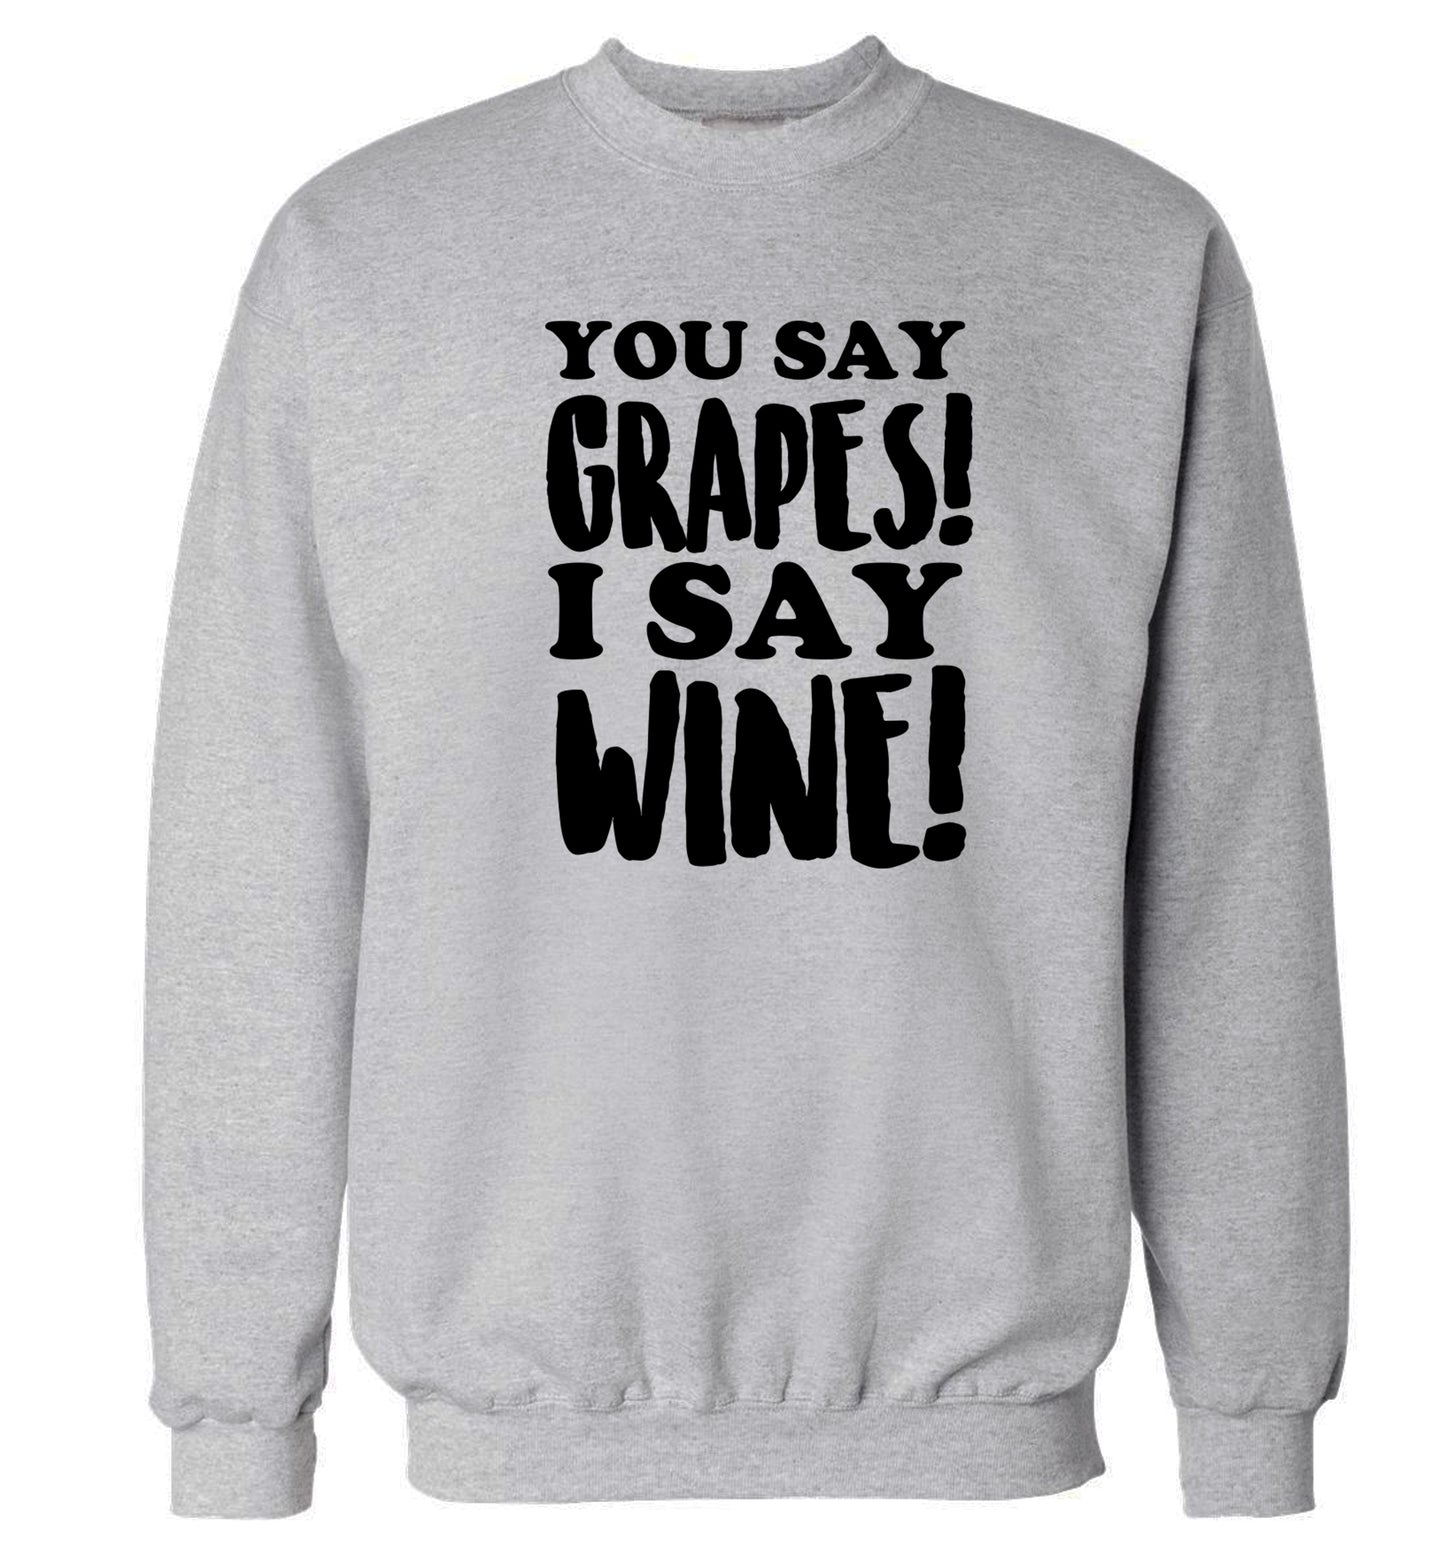 You say grapes I say wine! Adult's unisex grey Sweater 2XL